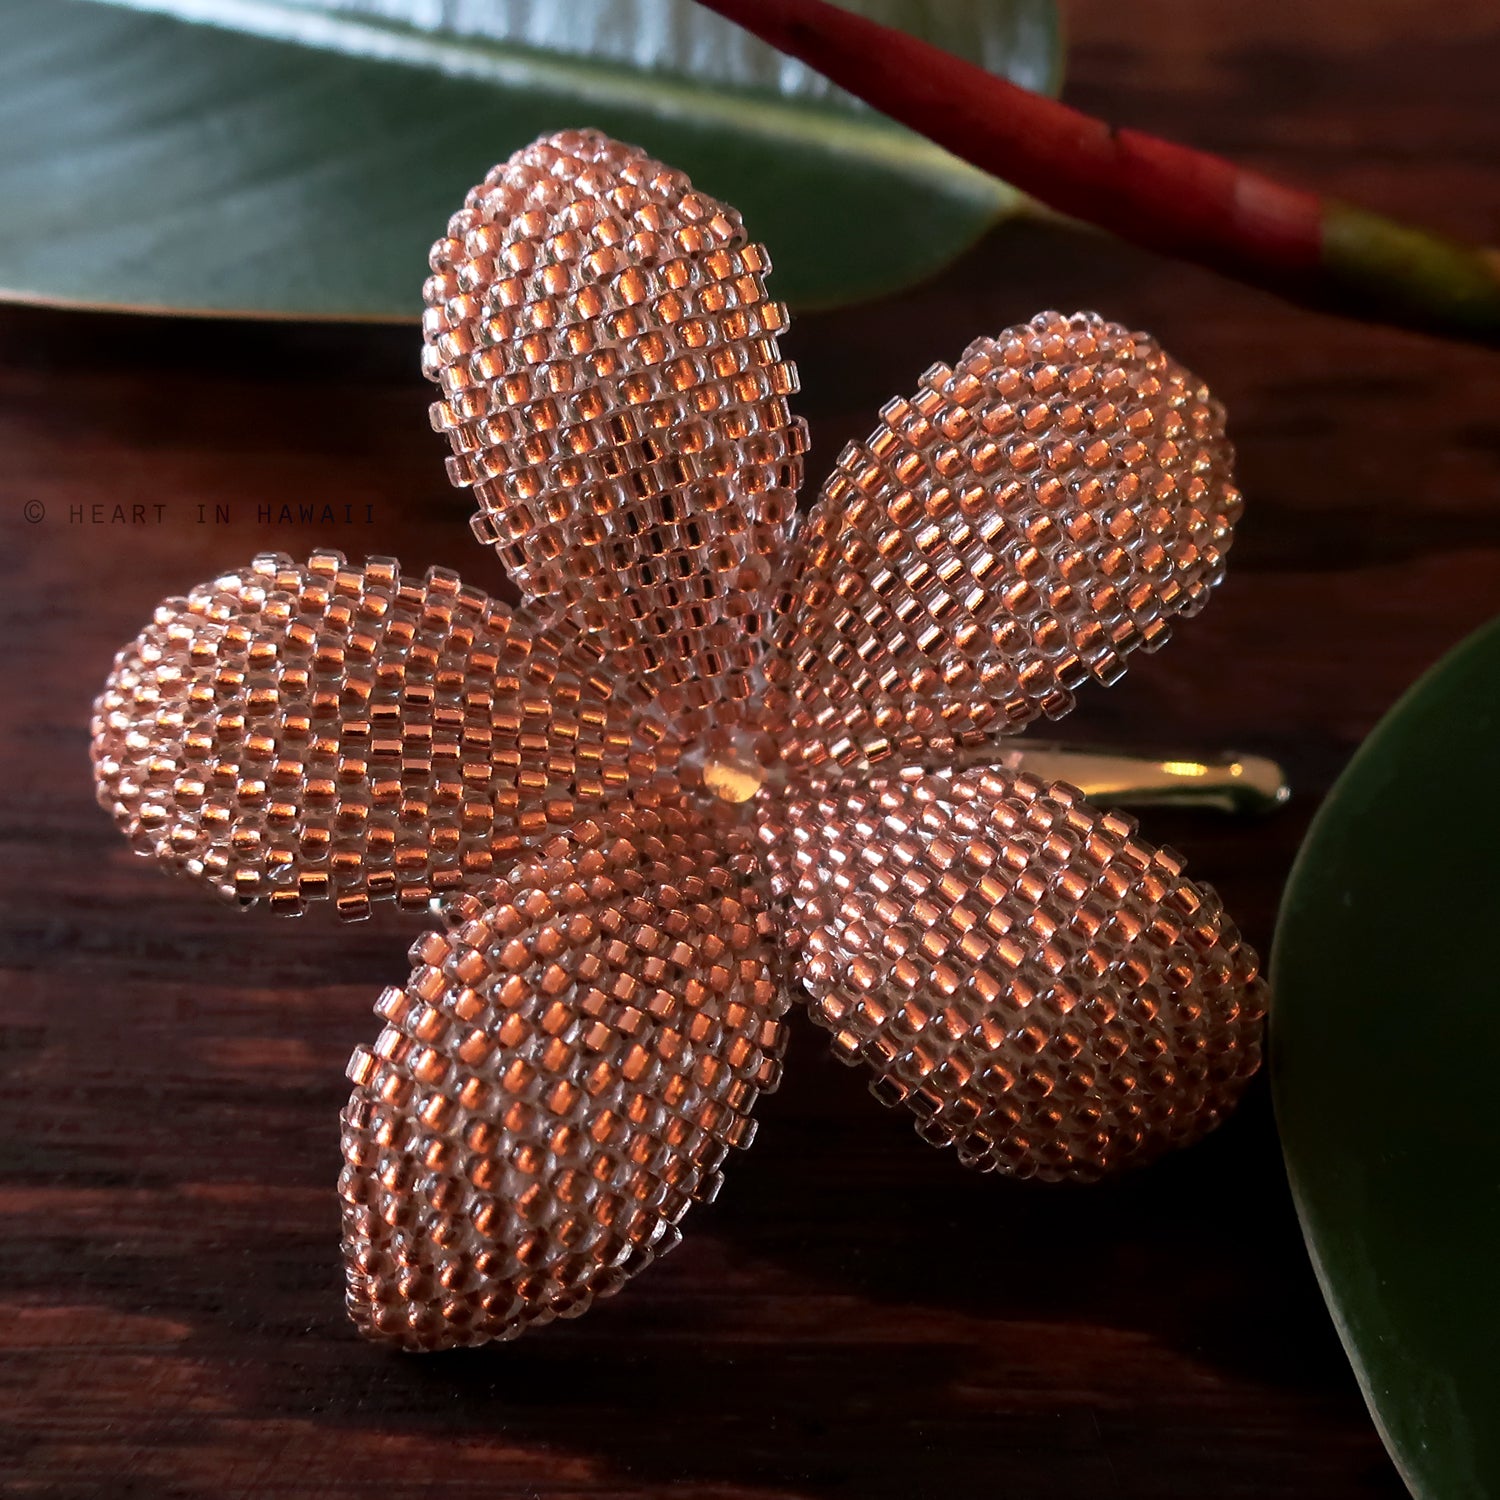 Heart in Hawaii 2.5 inch Beaded Plumeria Flower - Sparkly Copper